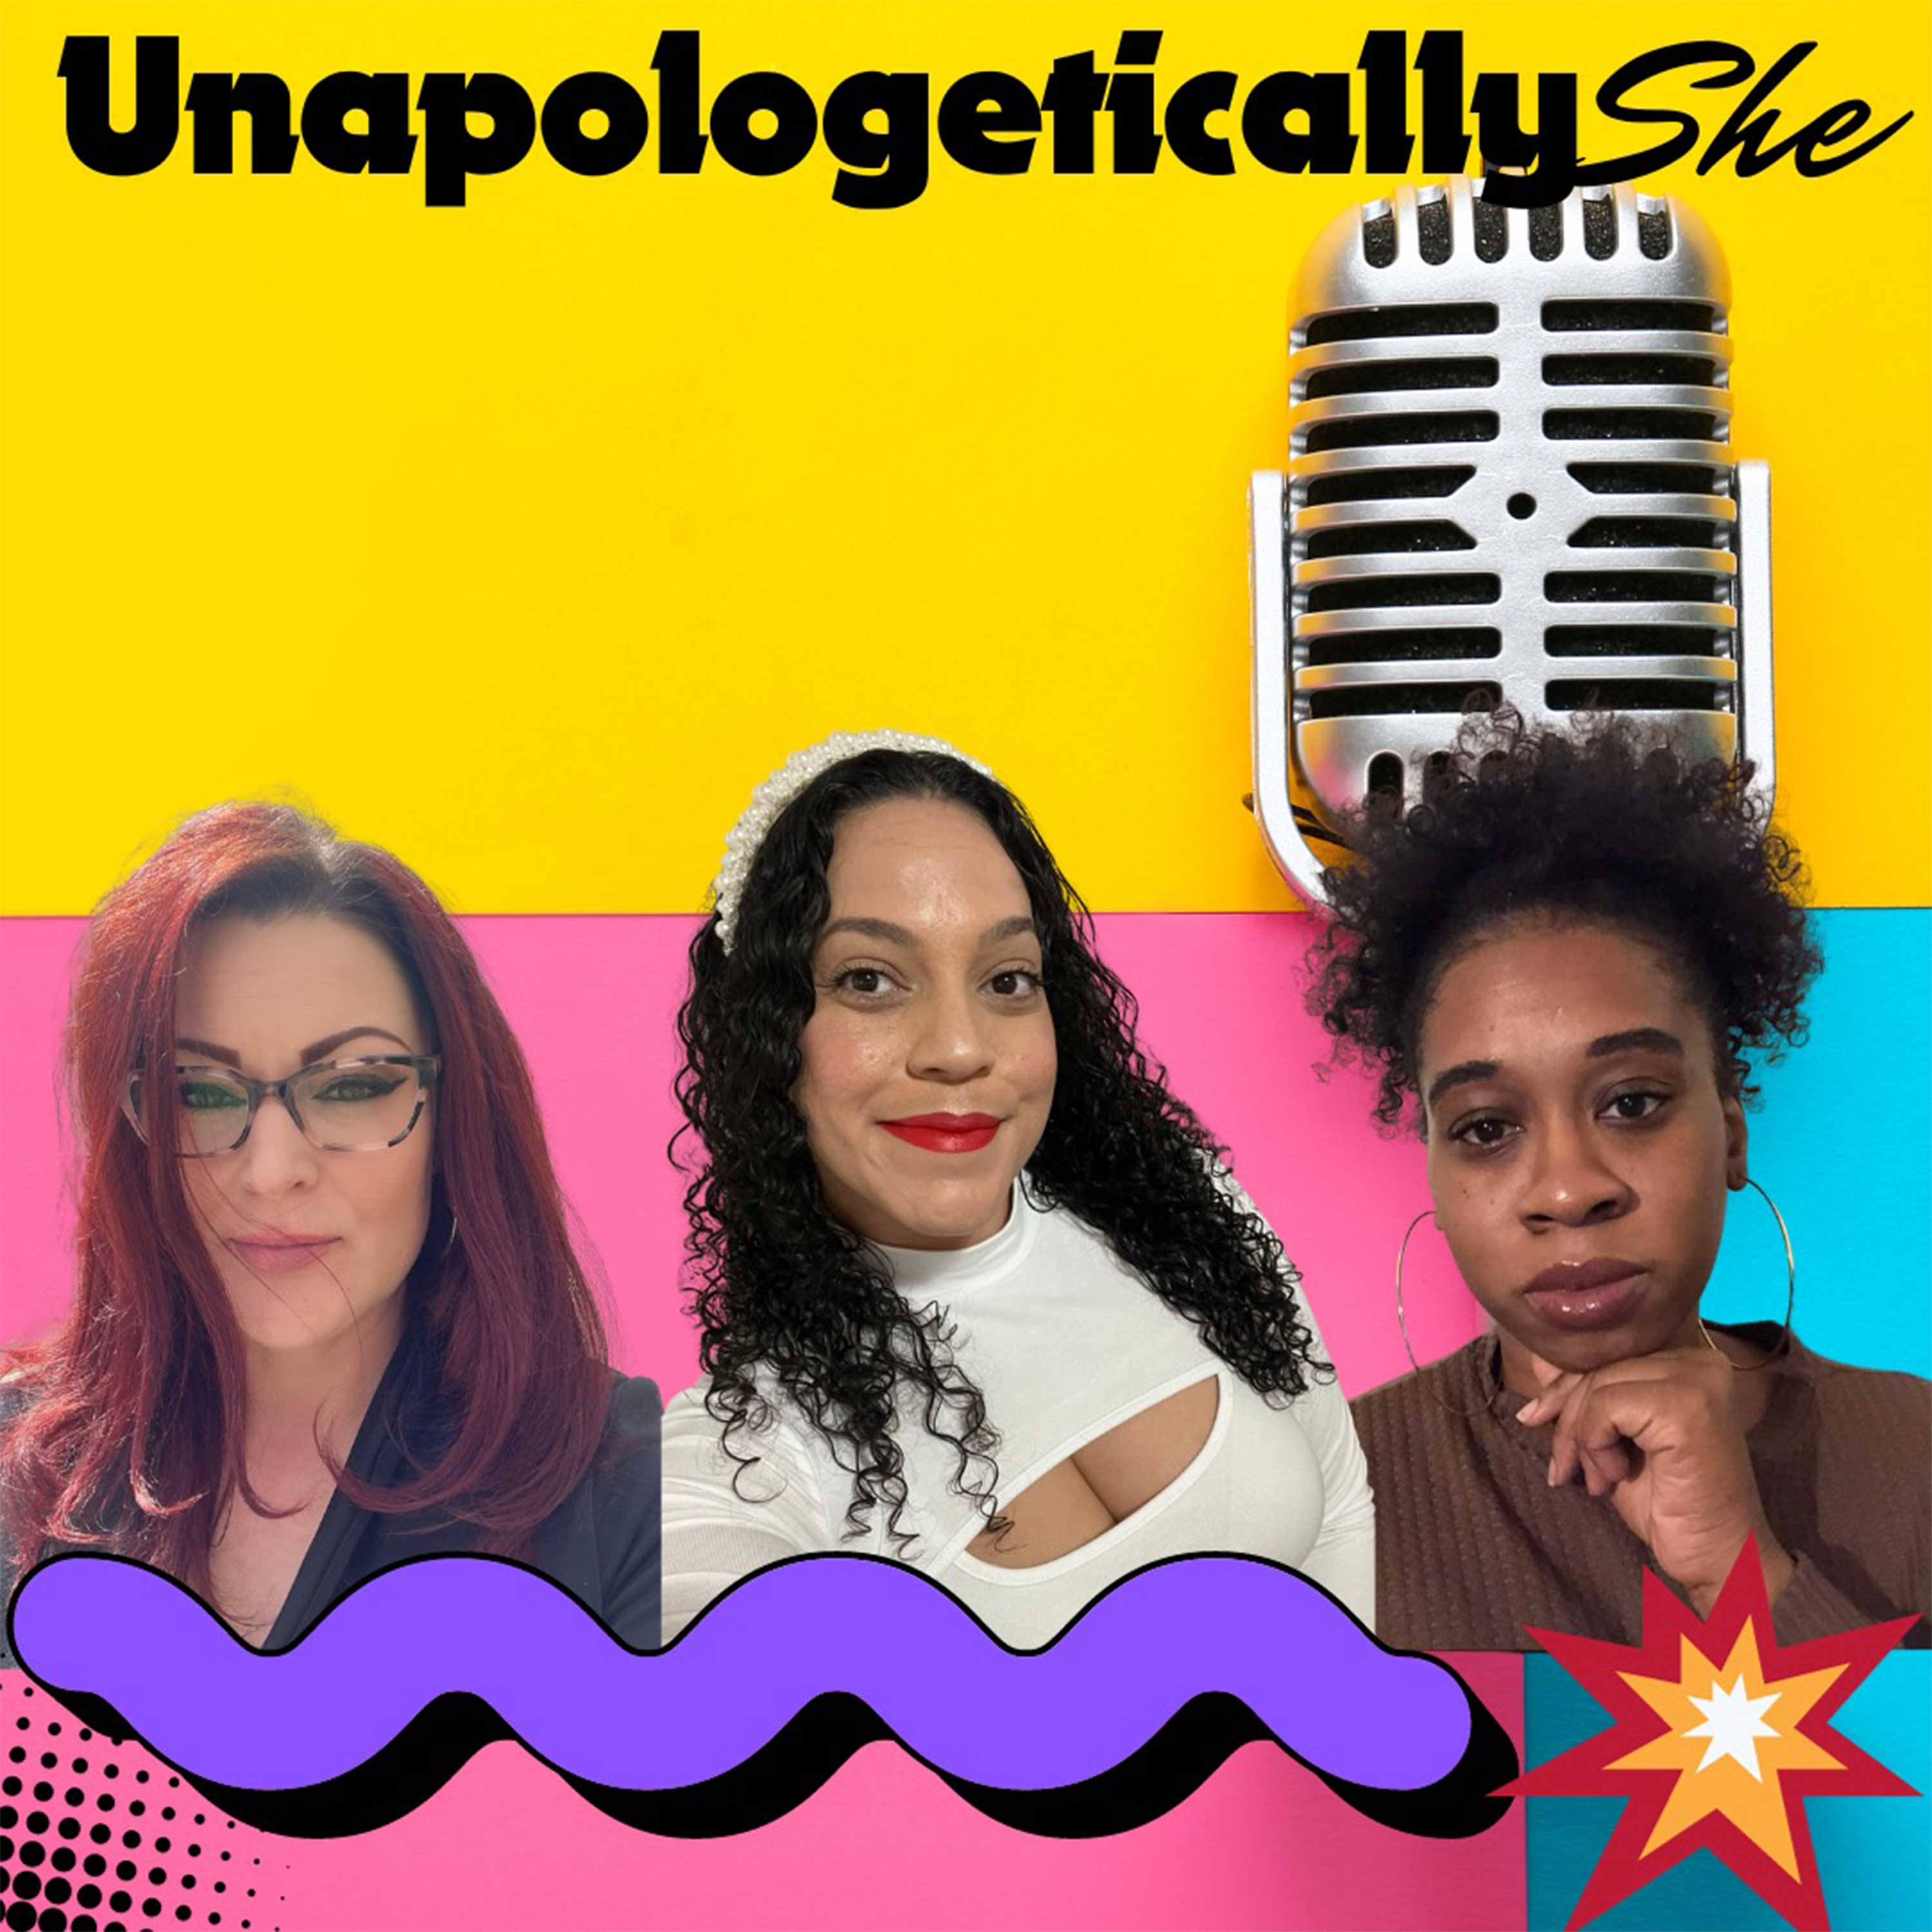 Artwork for Unapologetically She